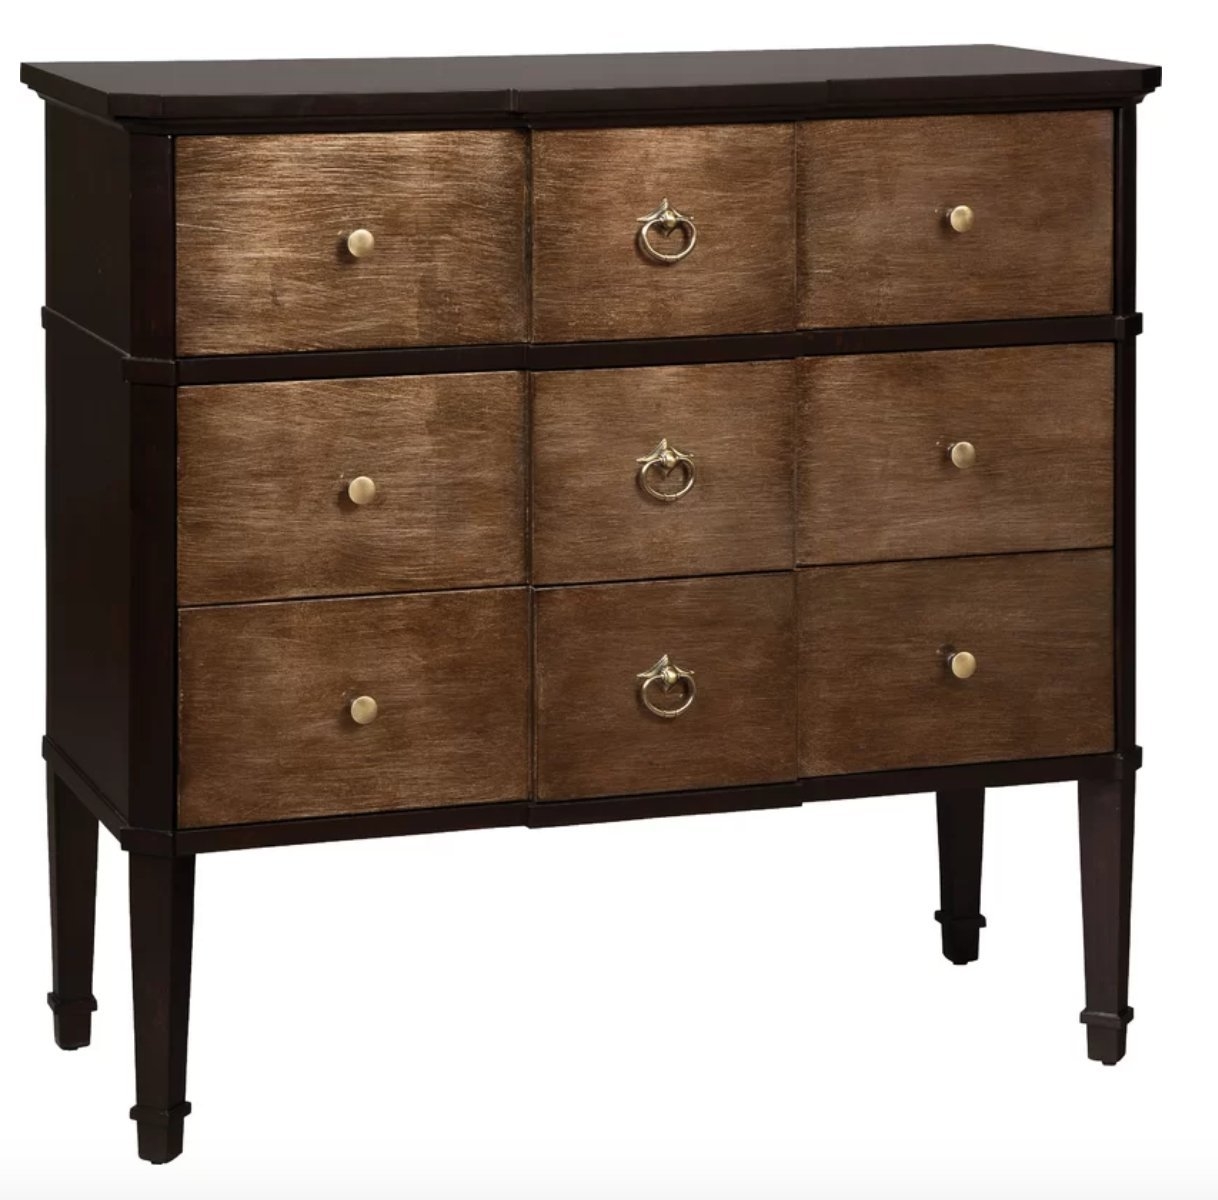 ANTIQUITY 3 DRAWER ACCENT CHEST - Image 0